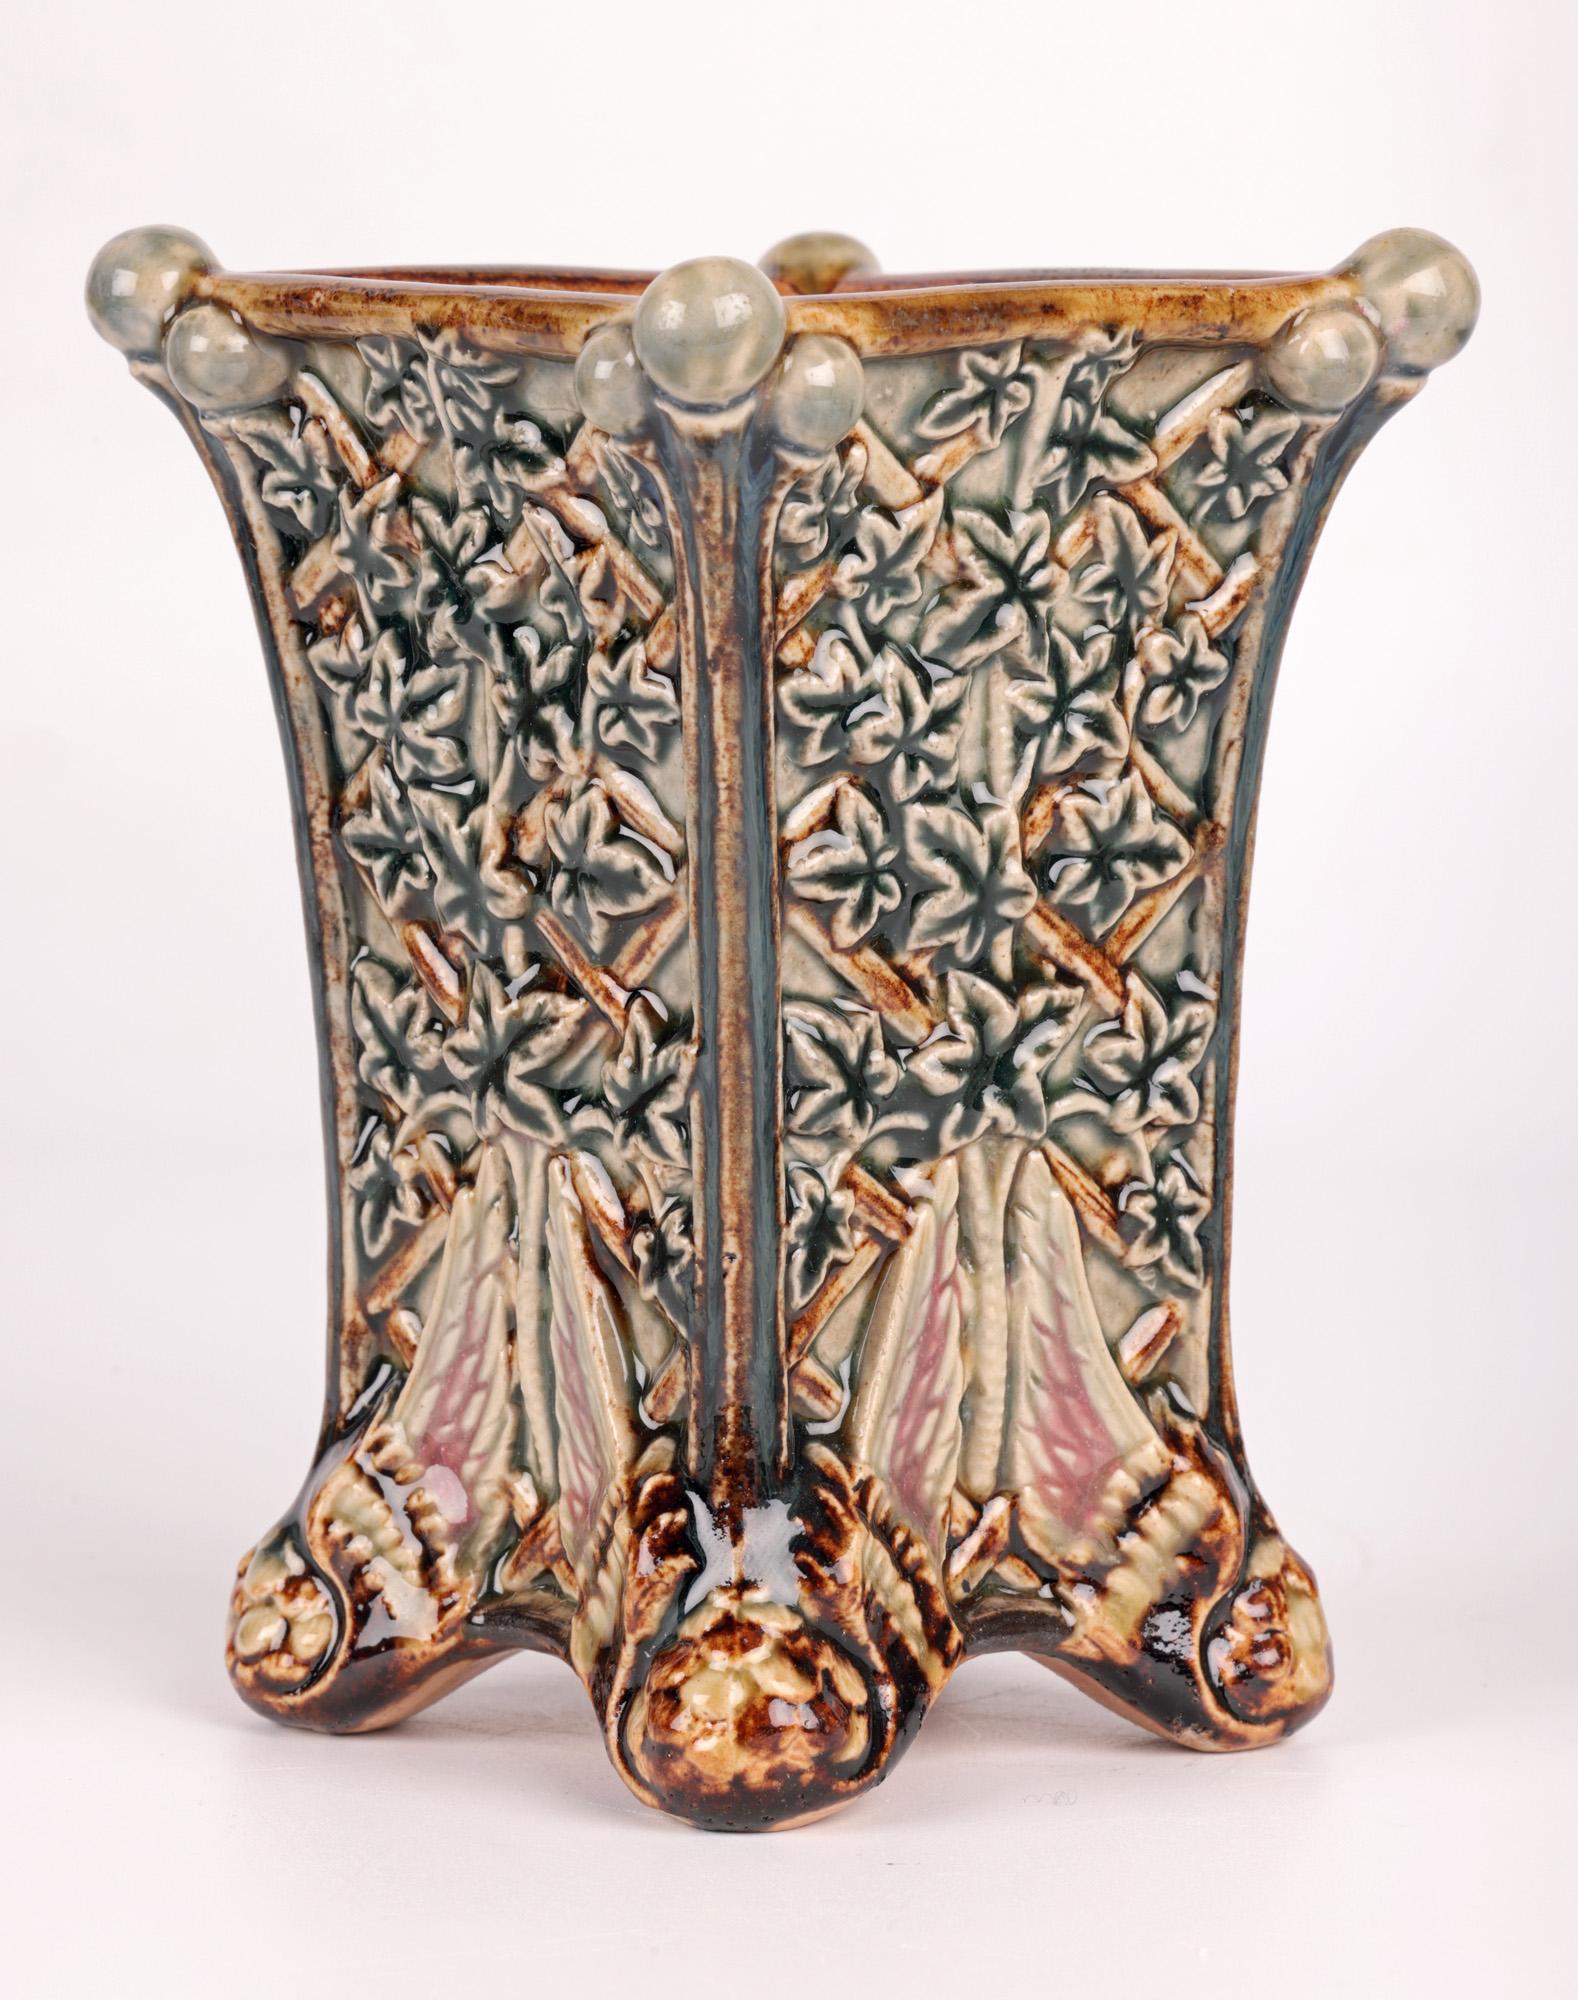 Hand-Crafted Doulton Lambeth Unusual Winged Foot Vase by Jane S Hurst 1880  For Sale